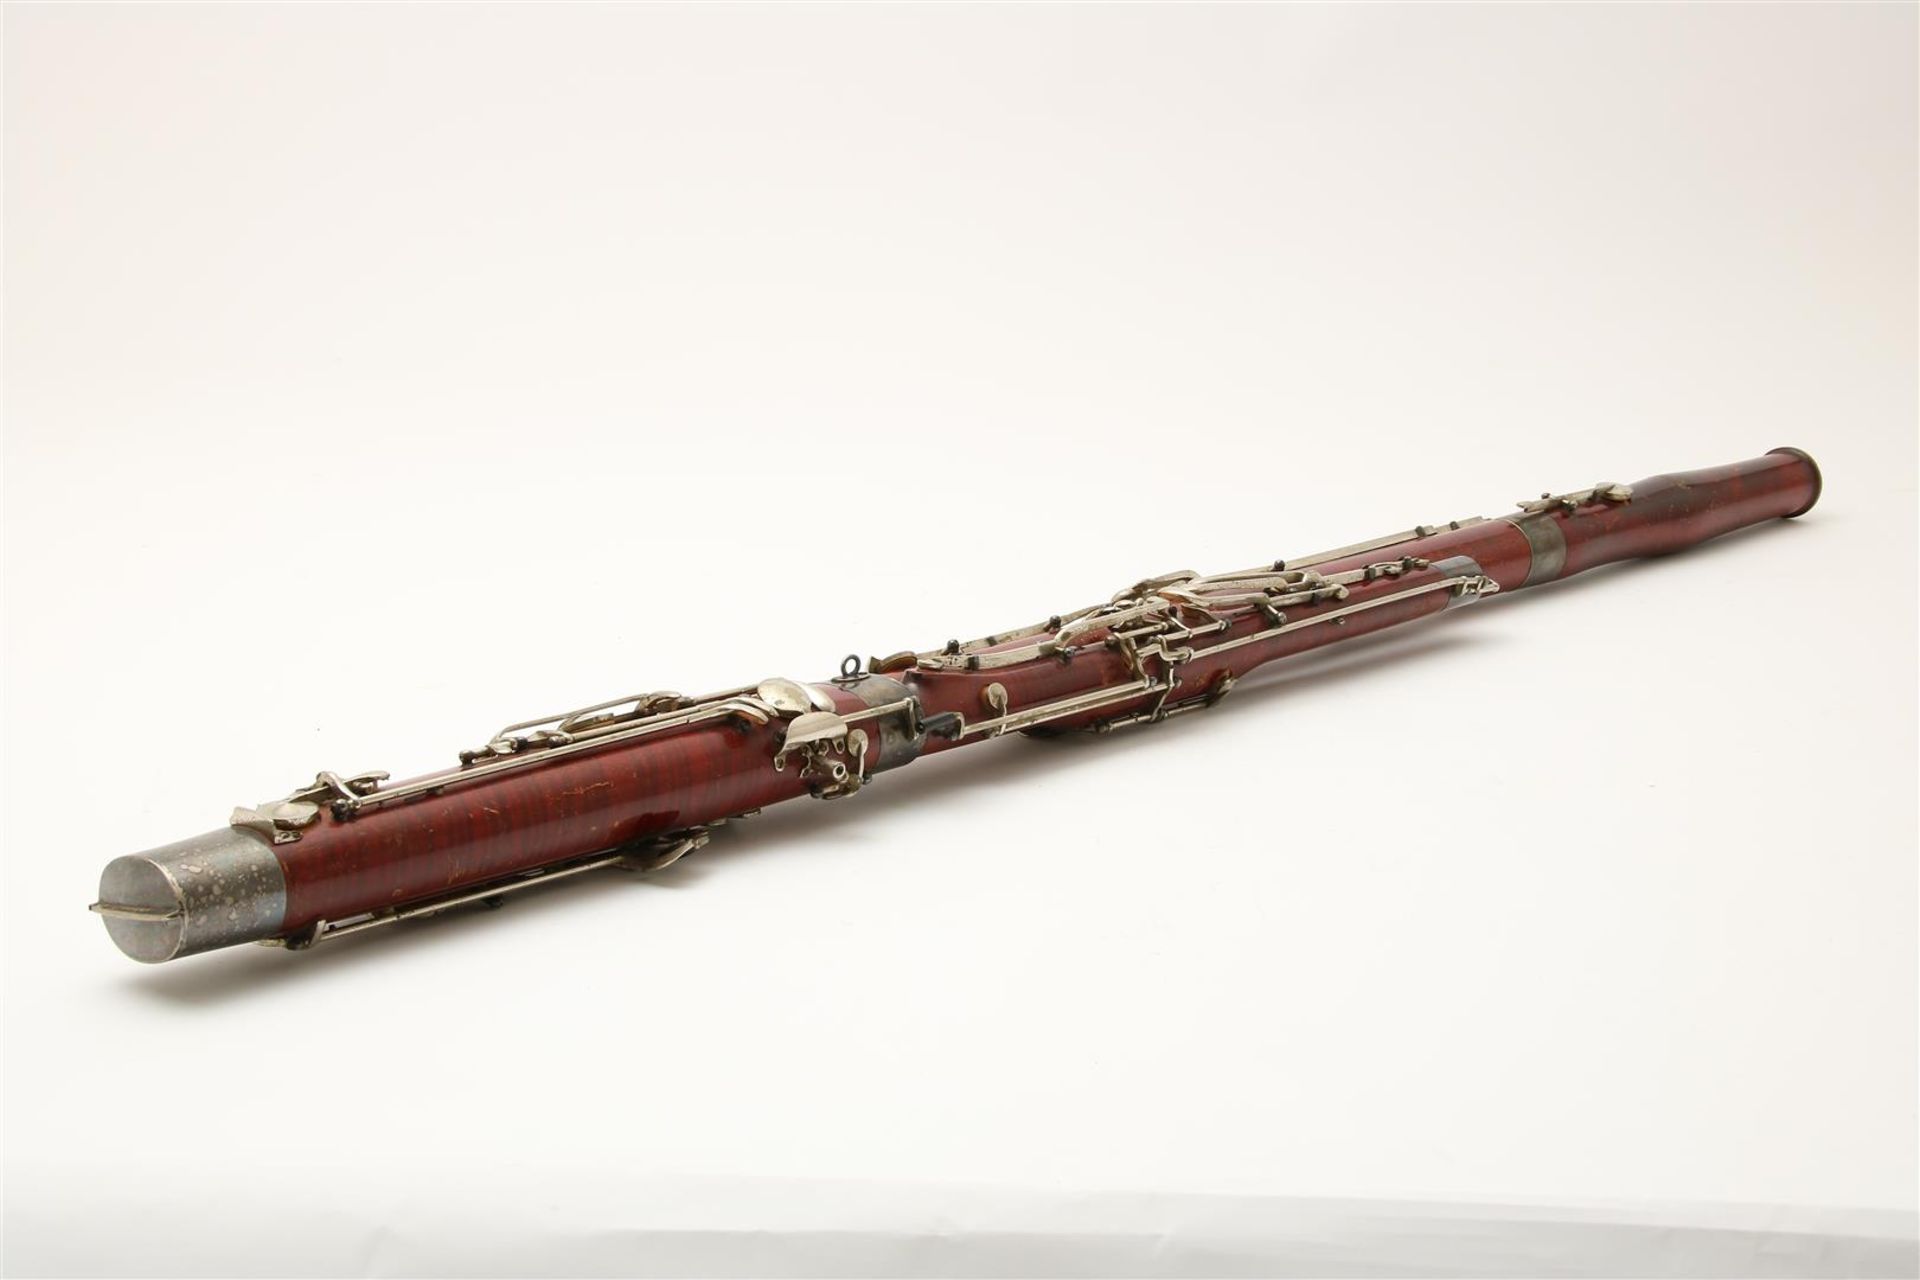 Wooden bassoon, address: Gebruder Monnich Markneukirch, length: 134 cm, ca. 1900, used condition,